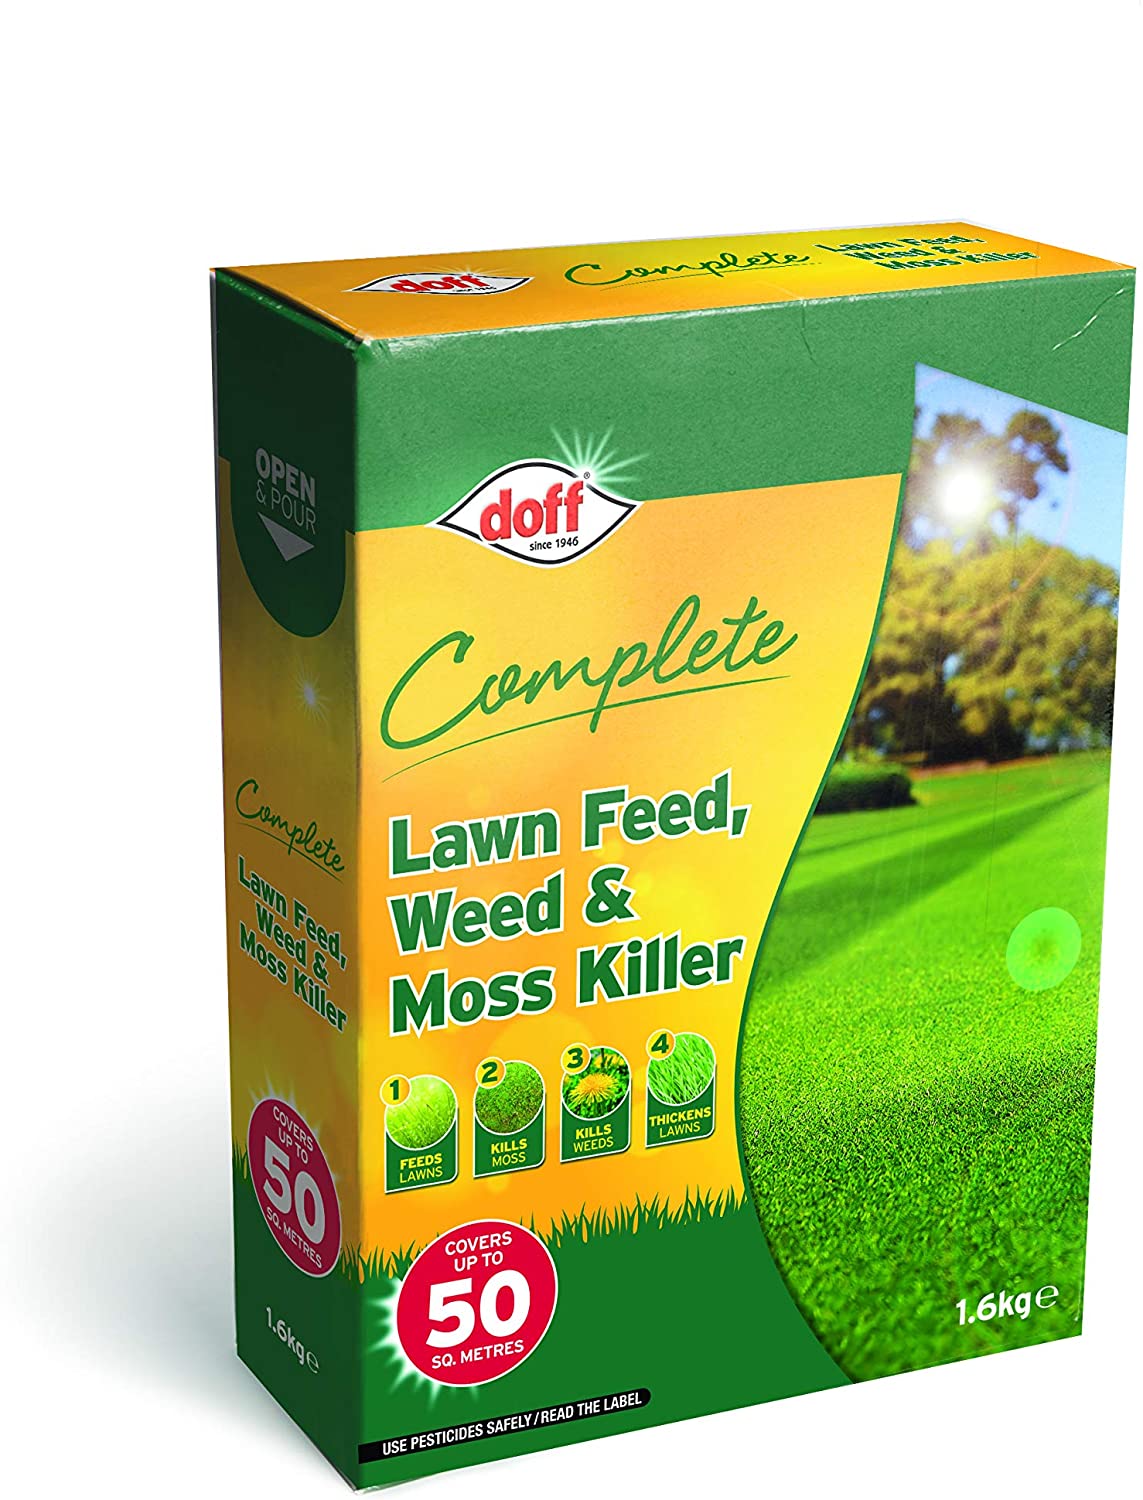 DOFF 1.6kg Complete Lawn Feed, Weed & Moss Killer